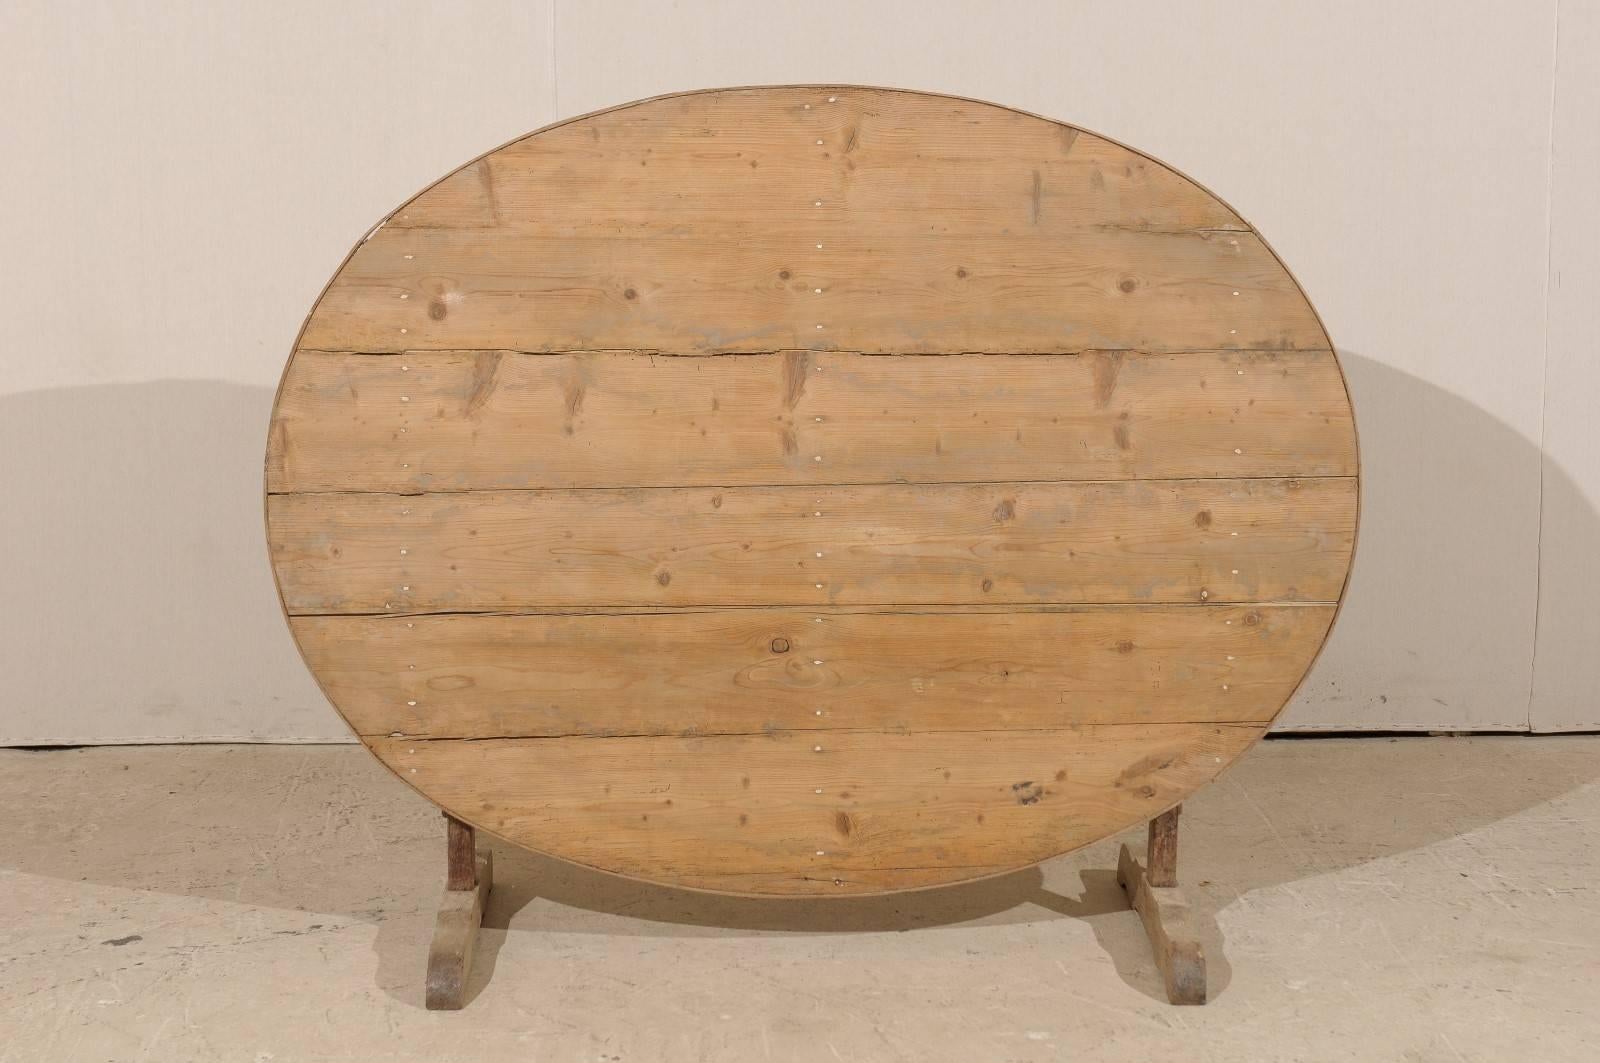 A French 19th century oval wine tasting table. This lovely rustic French wood table features a tilt top, which is the signature of wine tasting tables. This piece also features a butterfly wedge which turns to support the tabletop once the table is